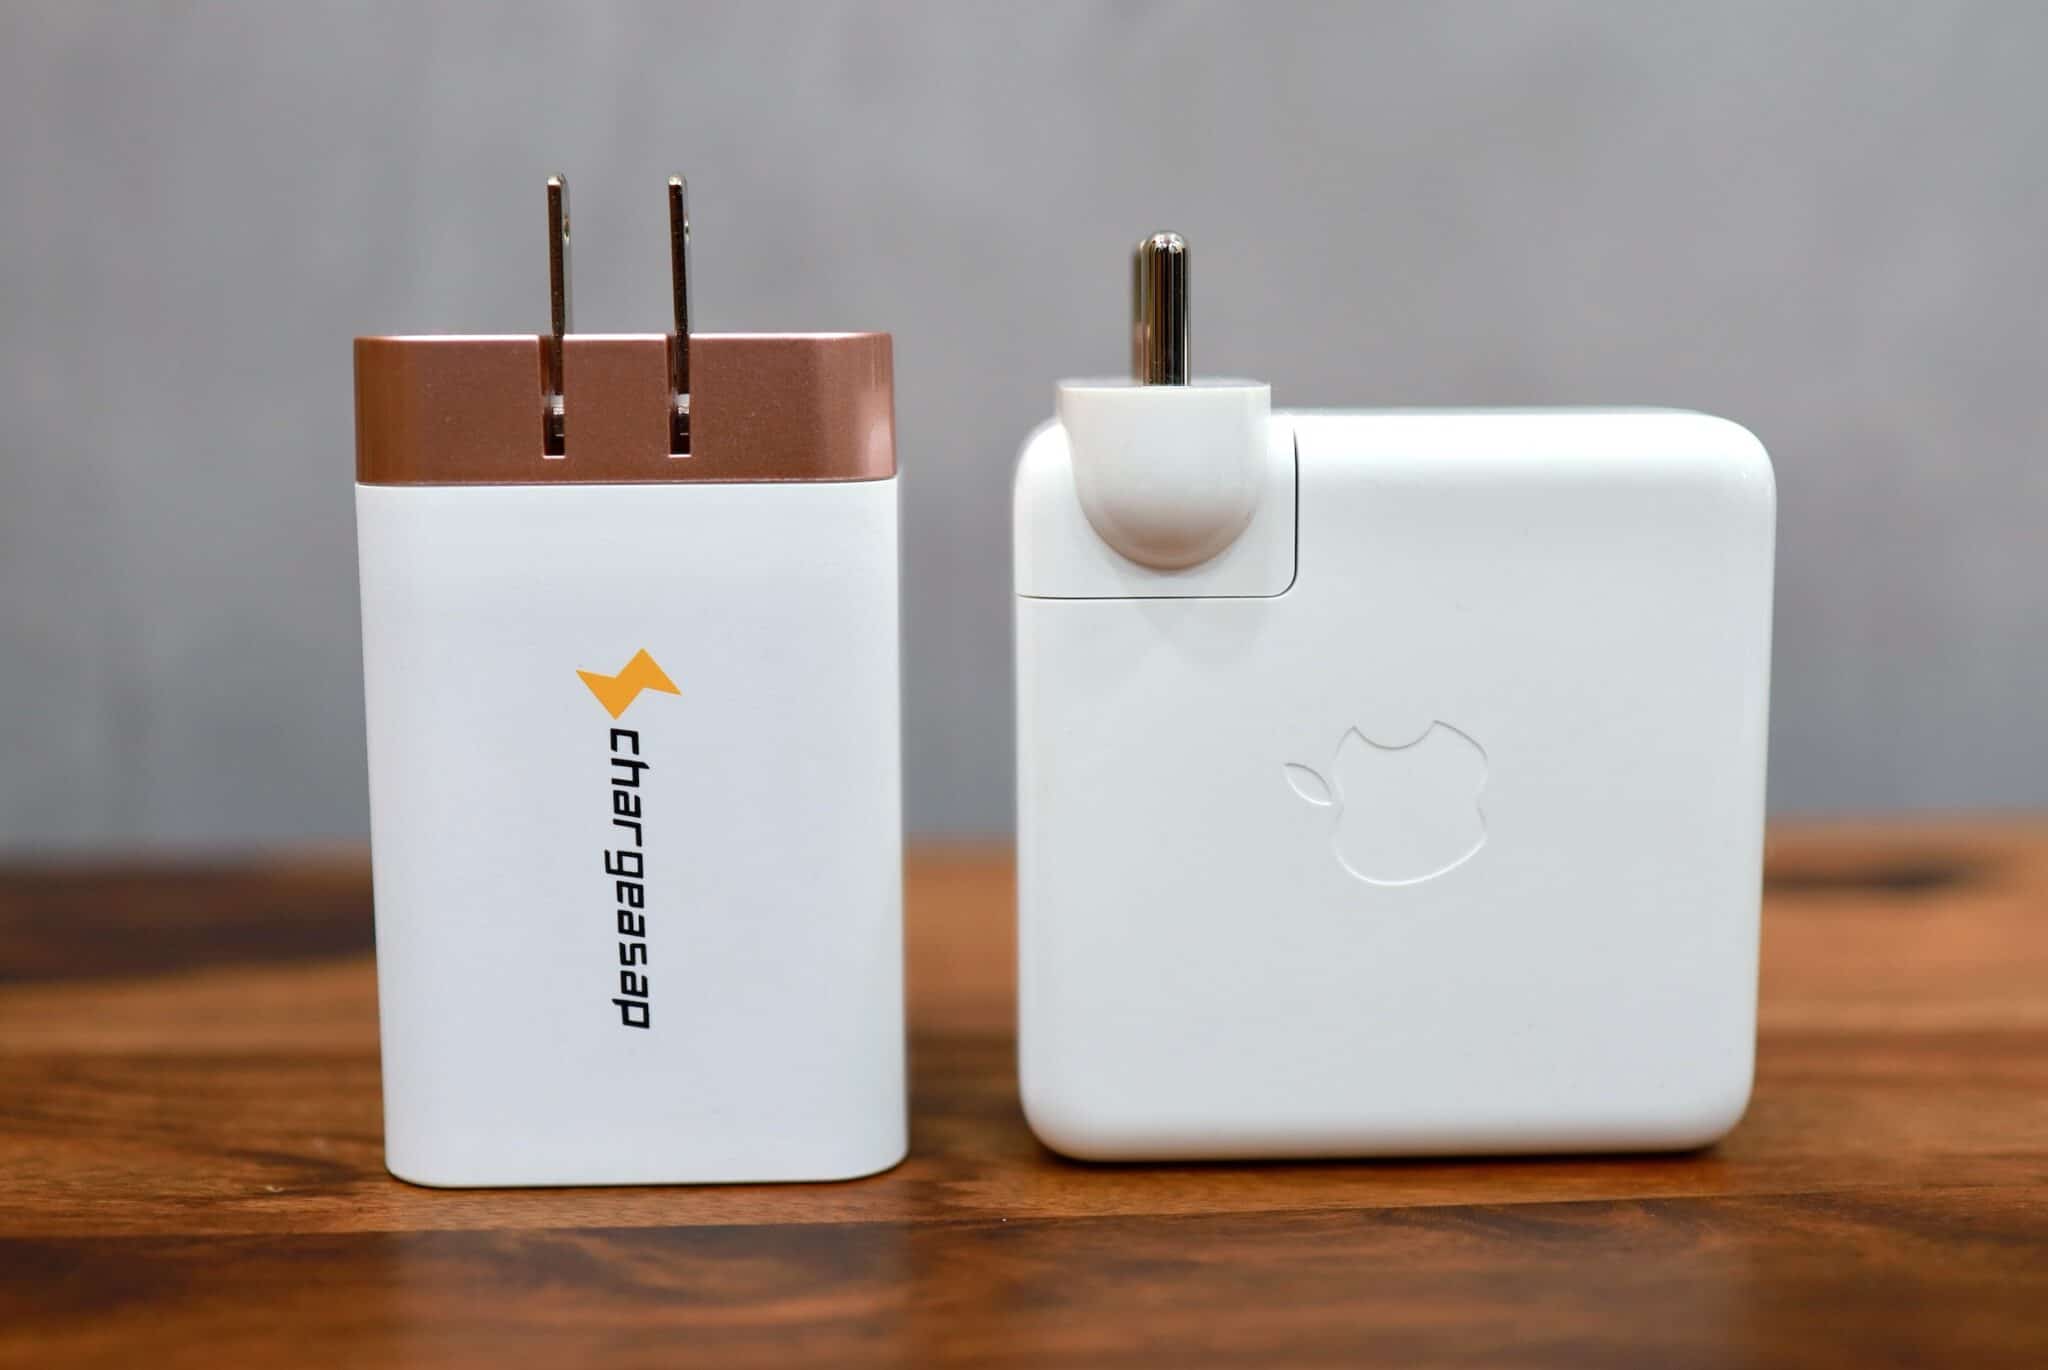 Omega 200W charger vs MacBook Pro charger